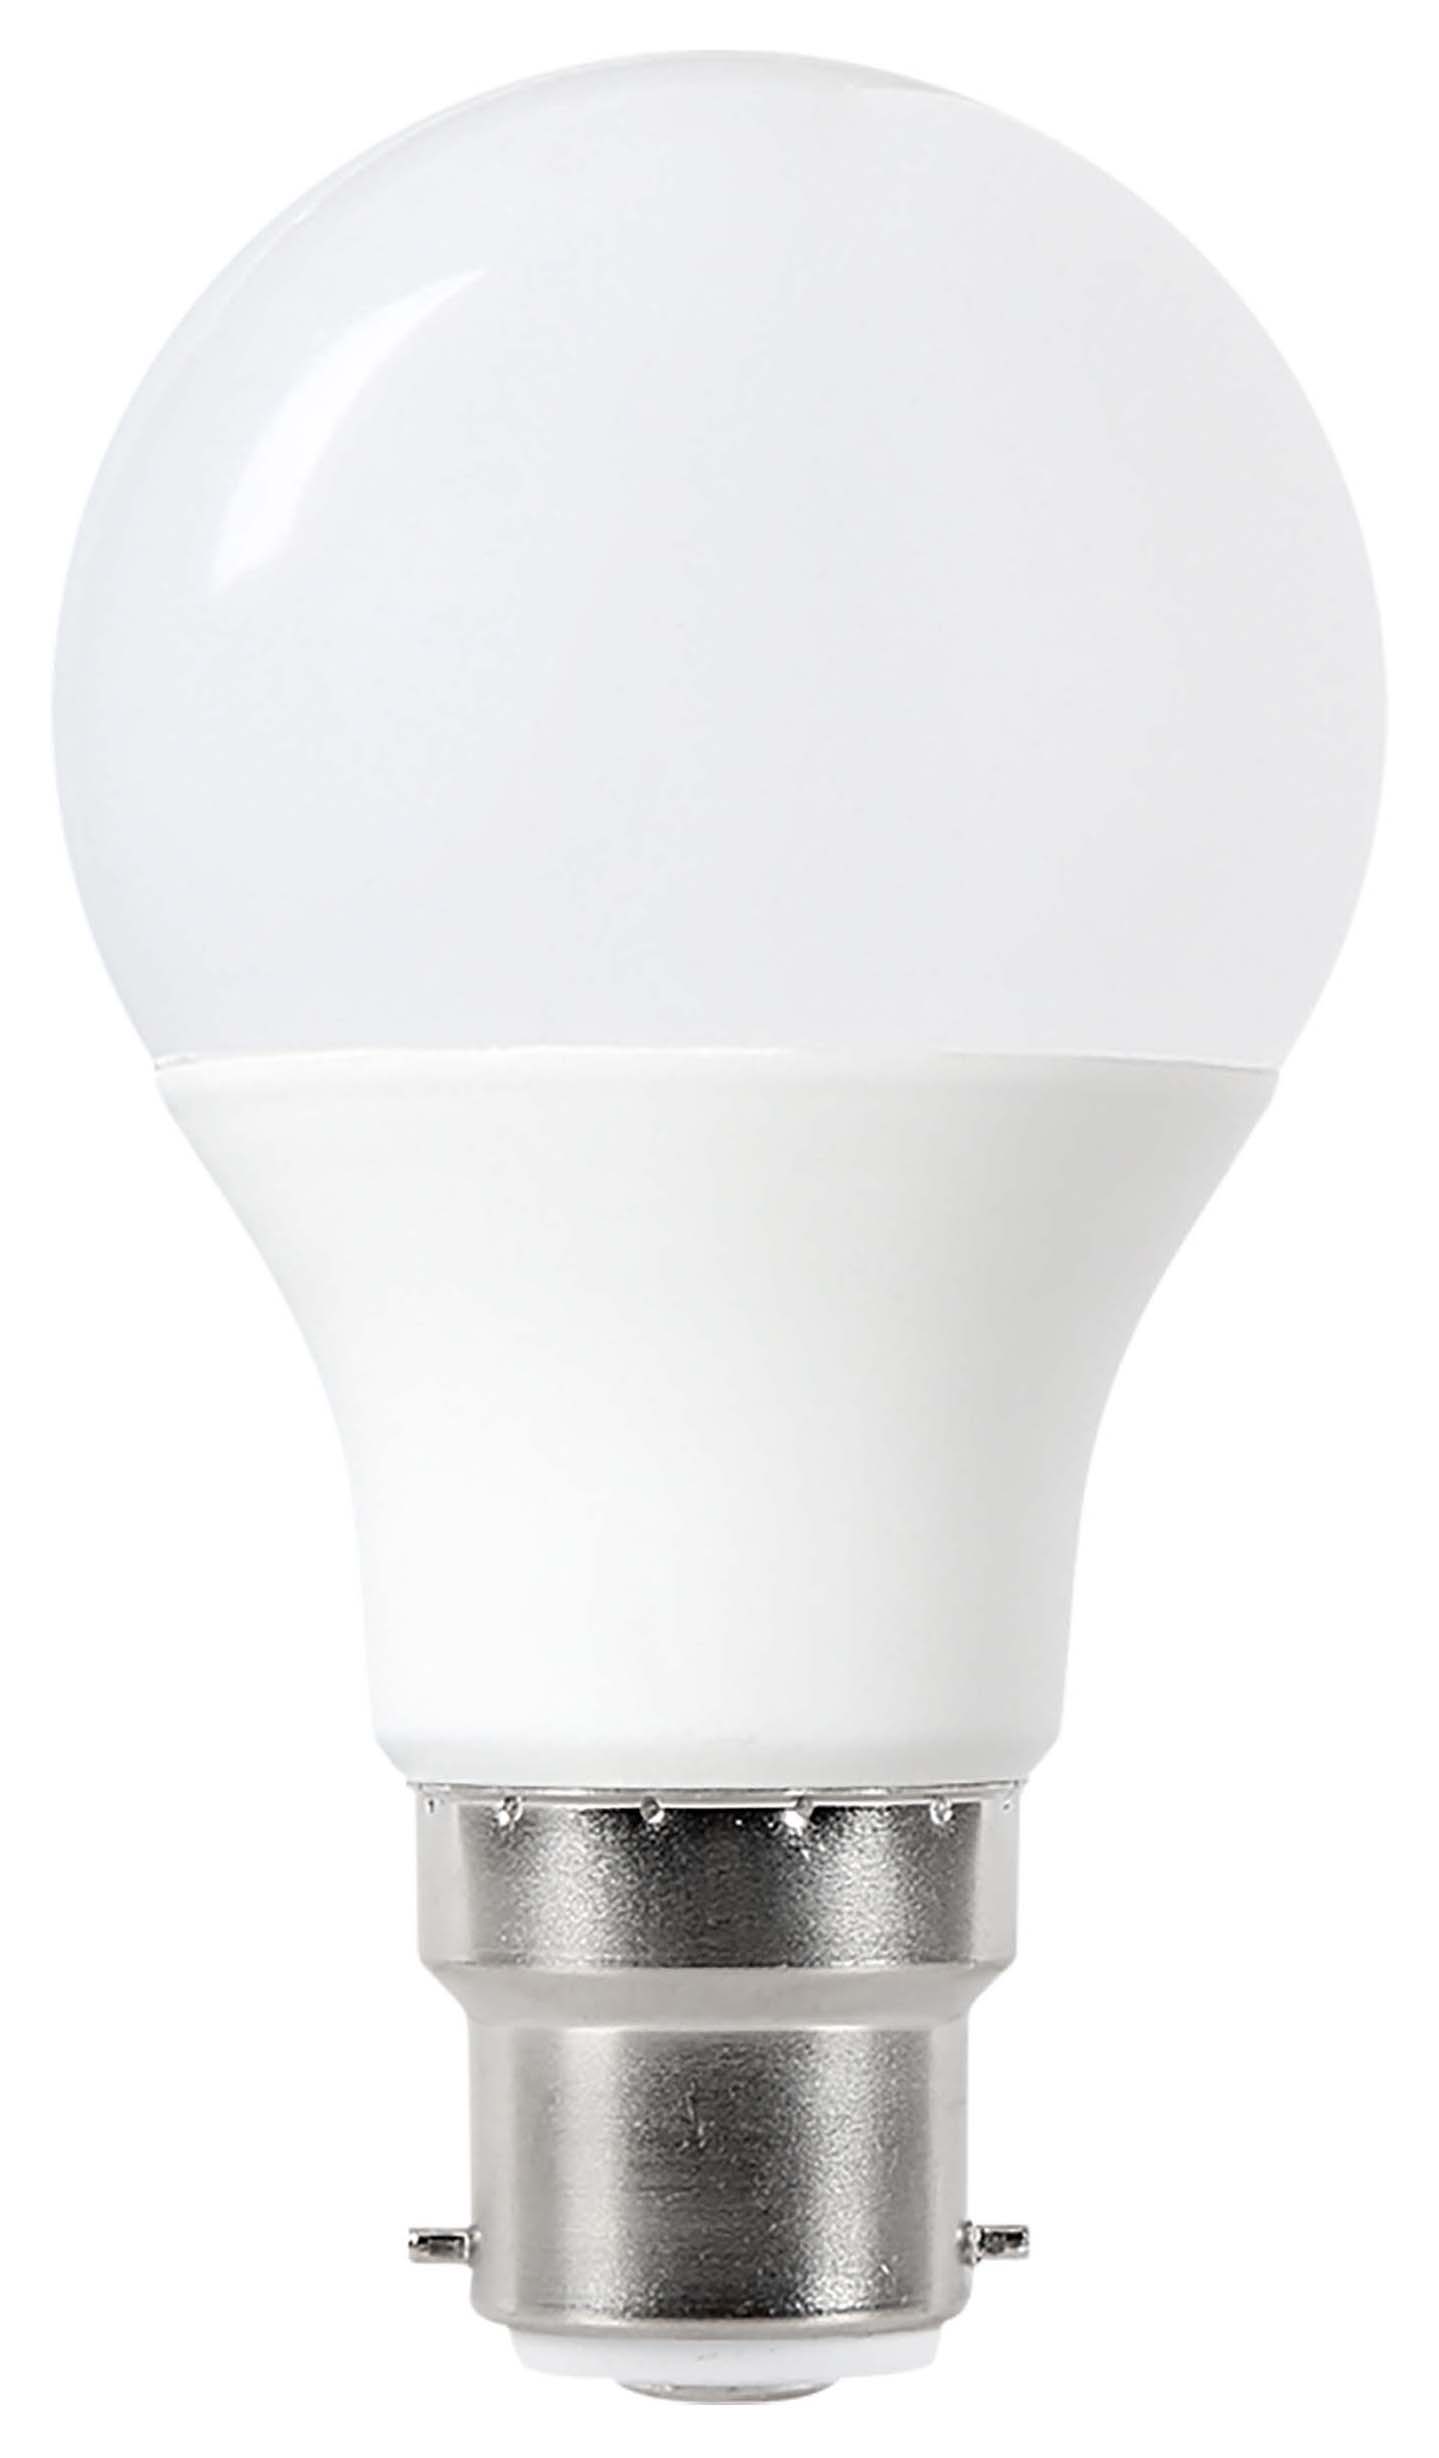 Image of Wickes Non-Dimmable GLS Opal LED B22 8.8W Warm White Light Bulb